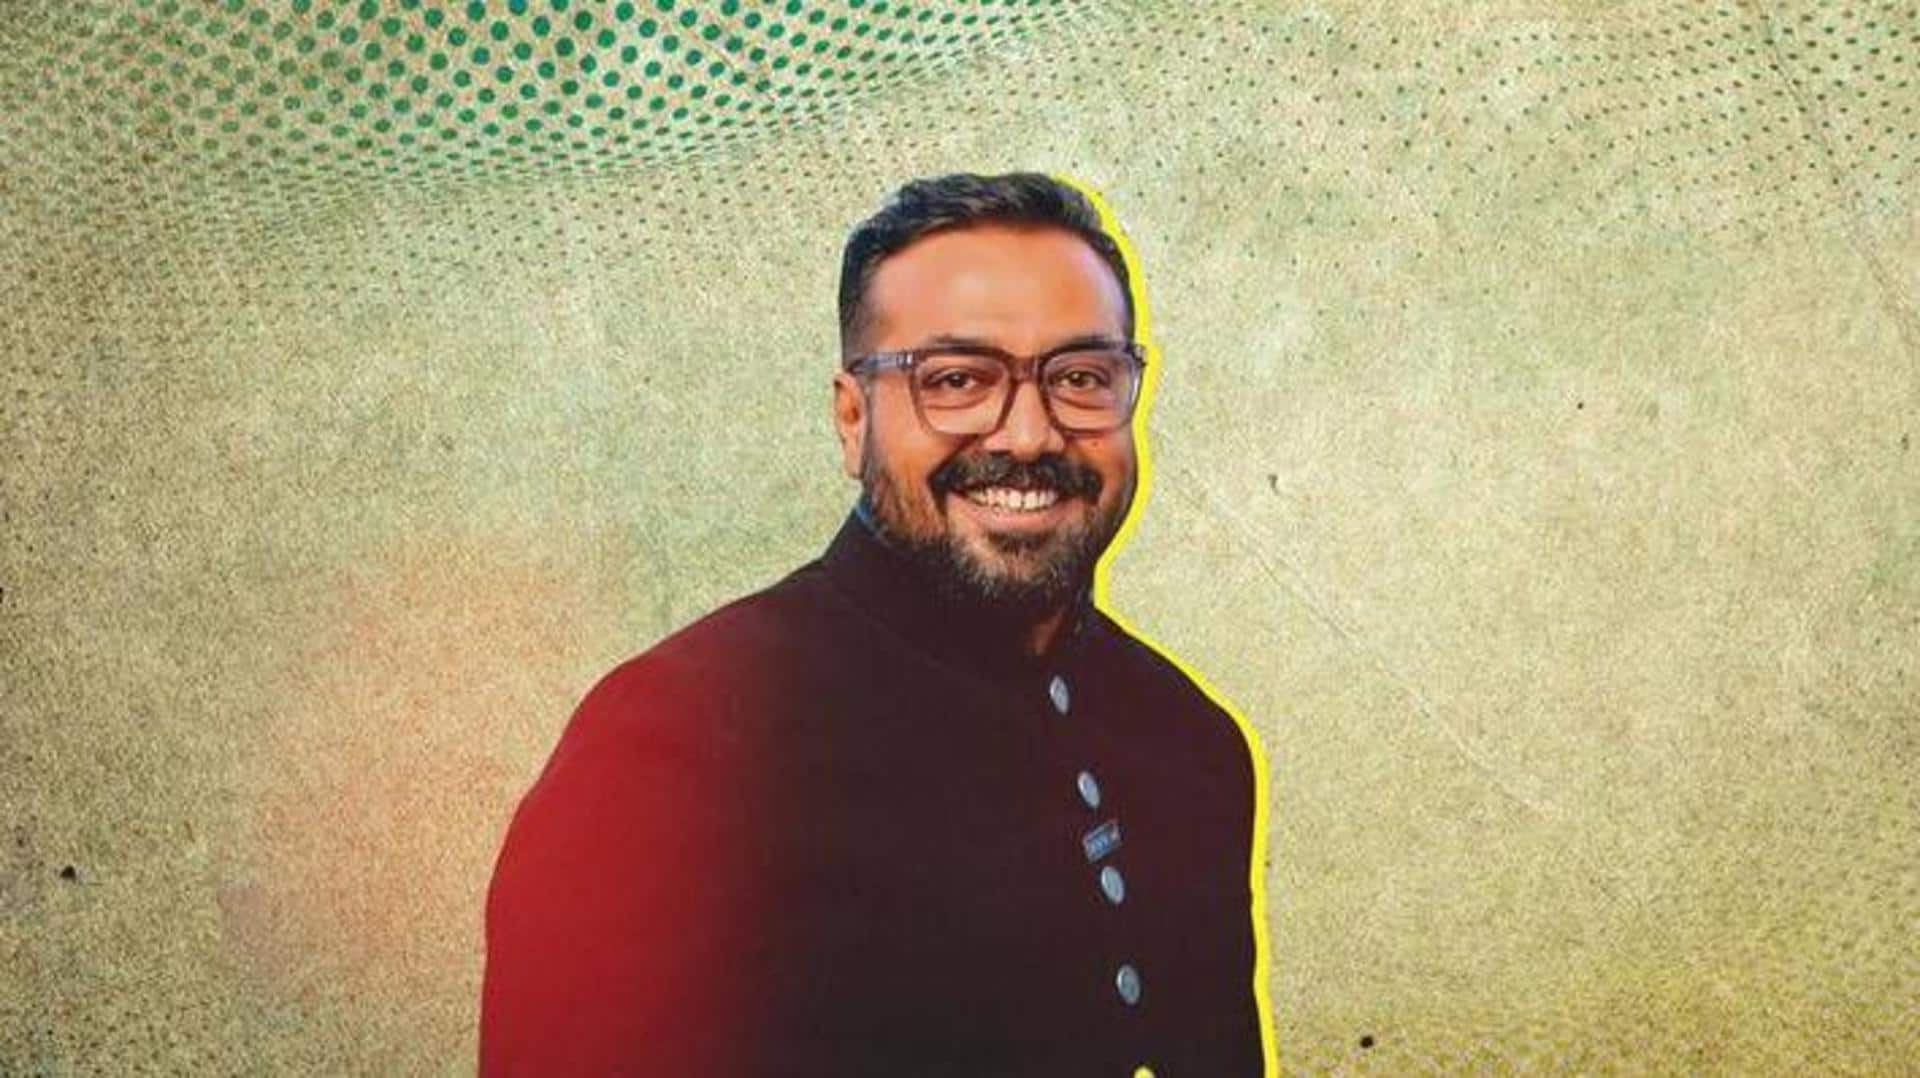 Anurag Kashyap opens up about battling depression, suffering heart attack